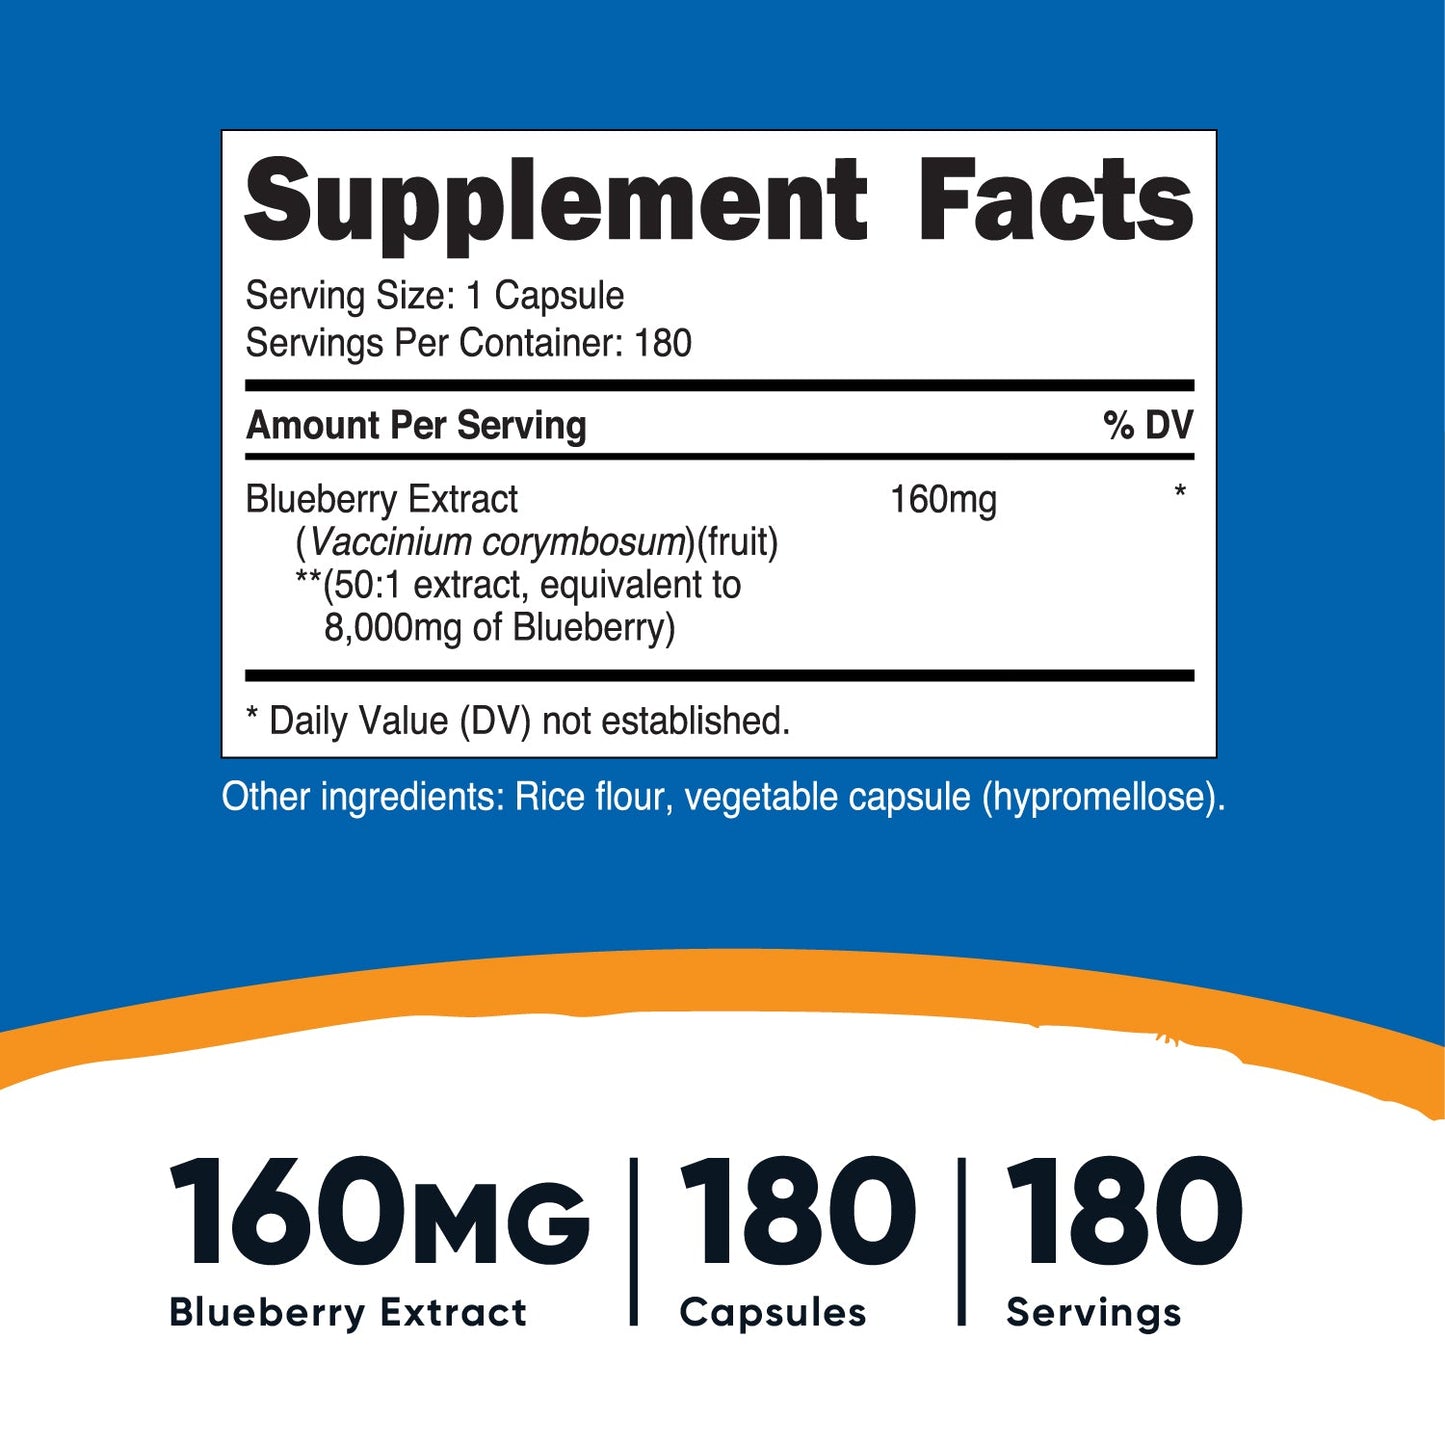 Nutricost Blueberry Extract Capsules